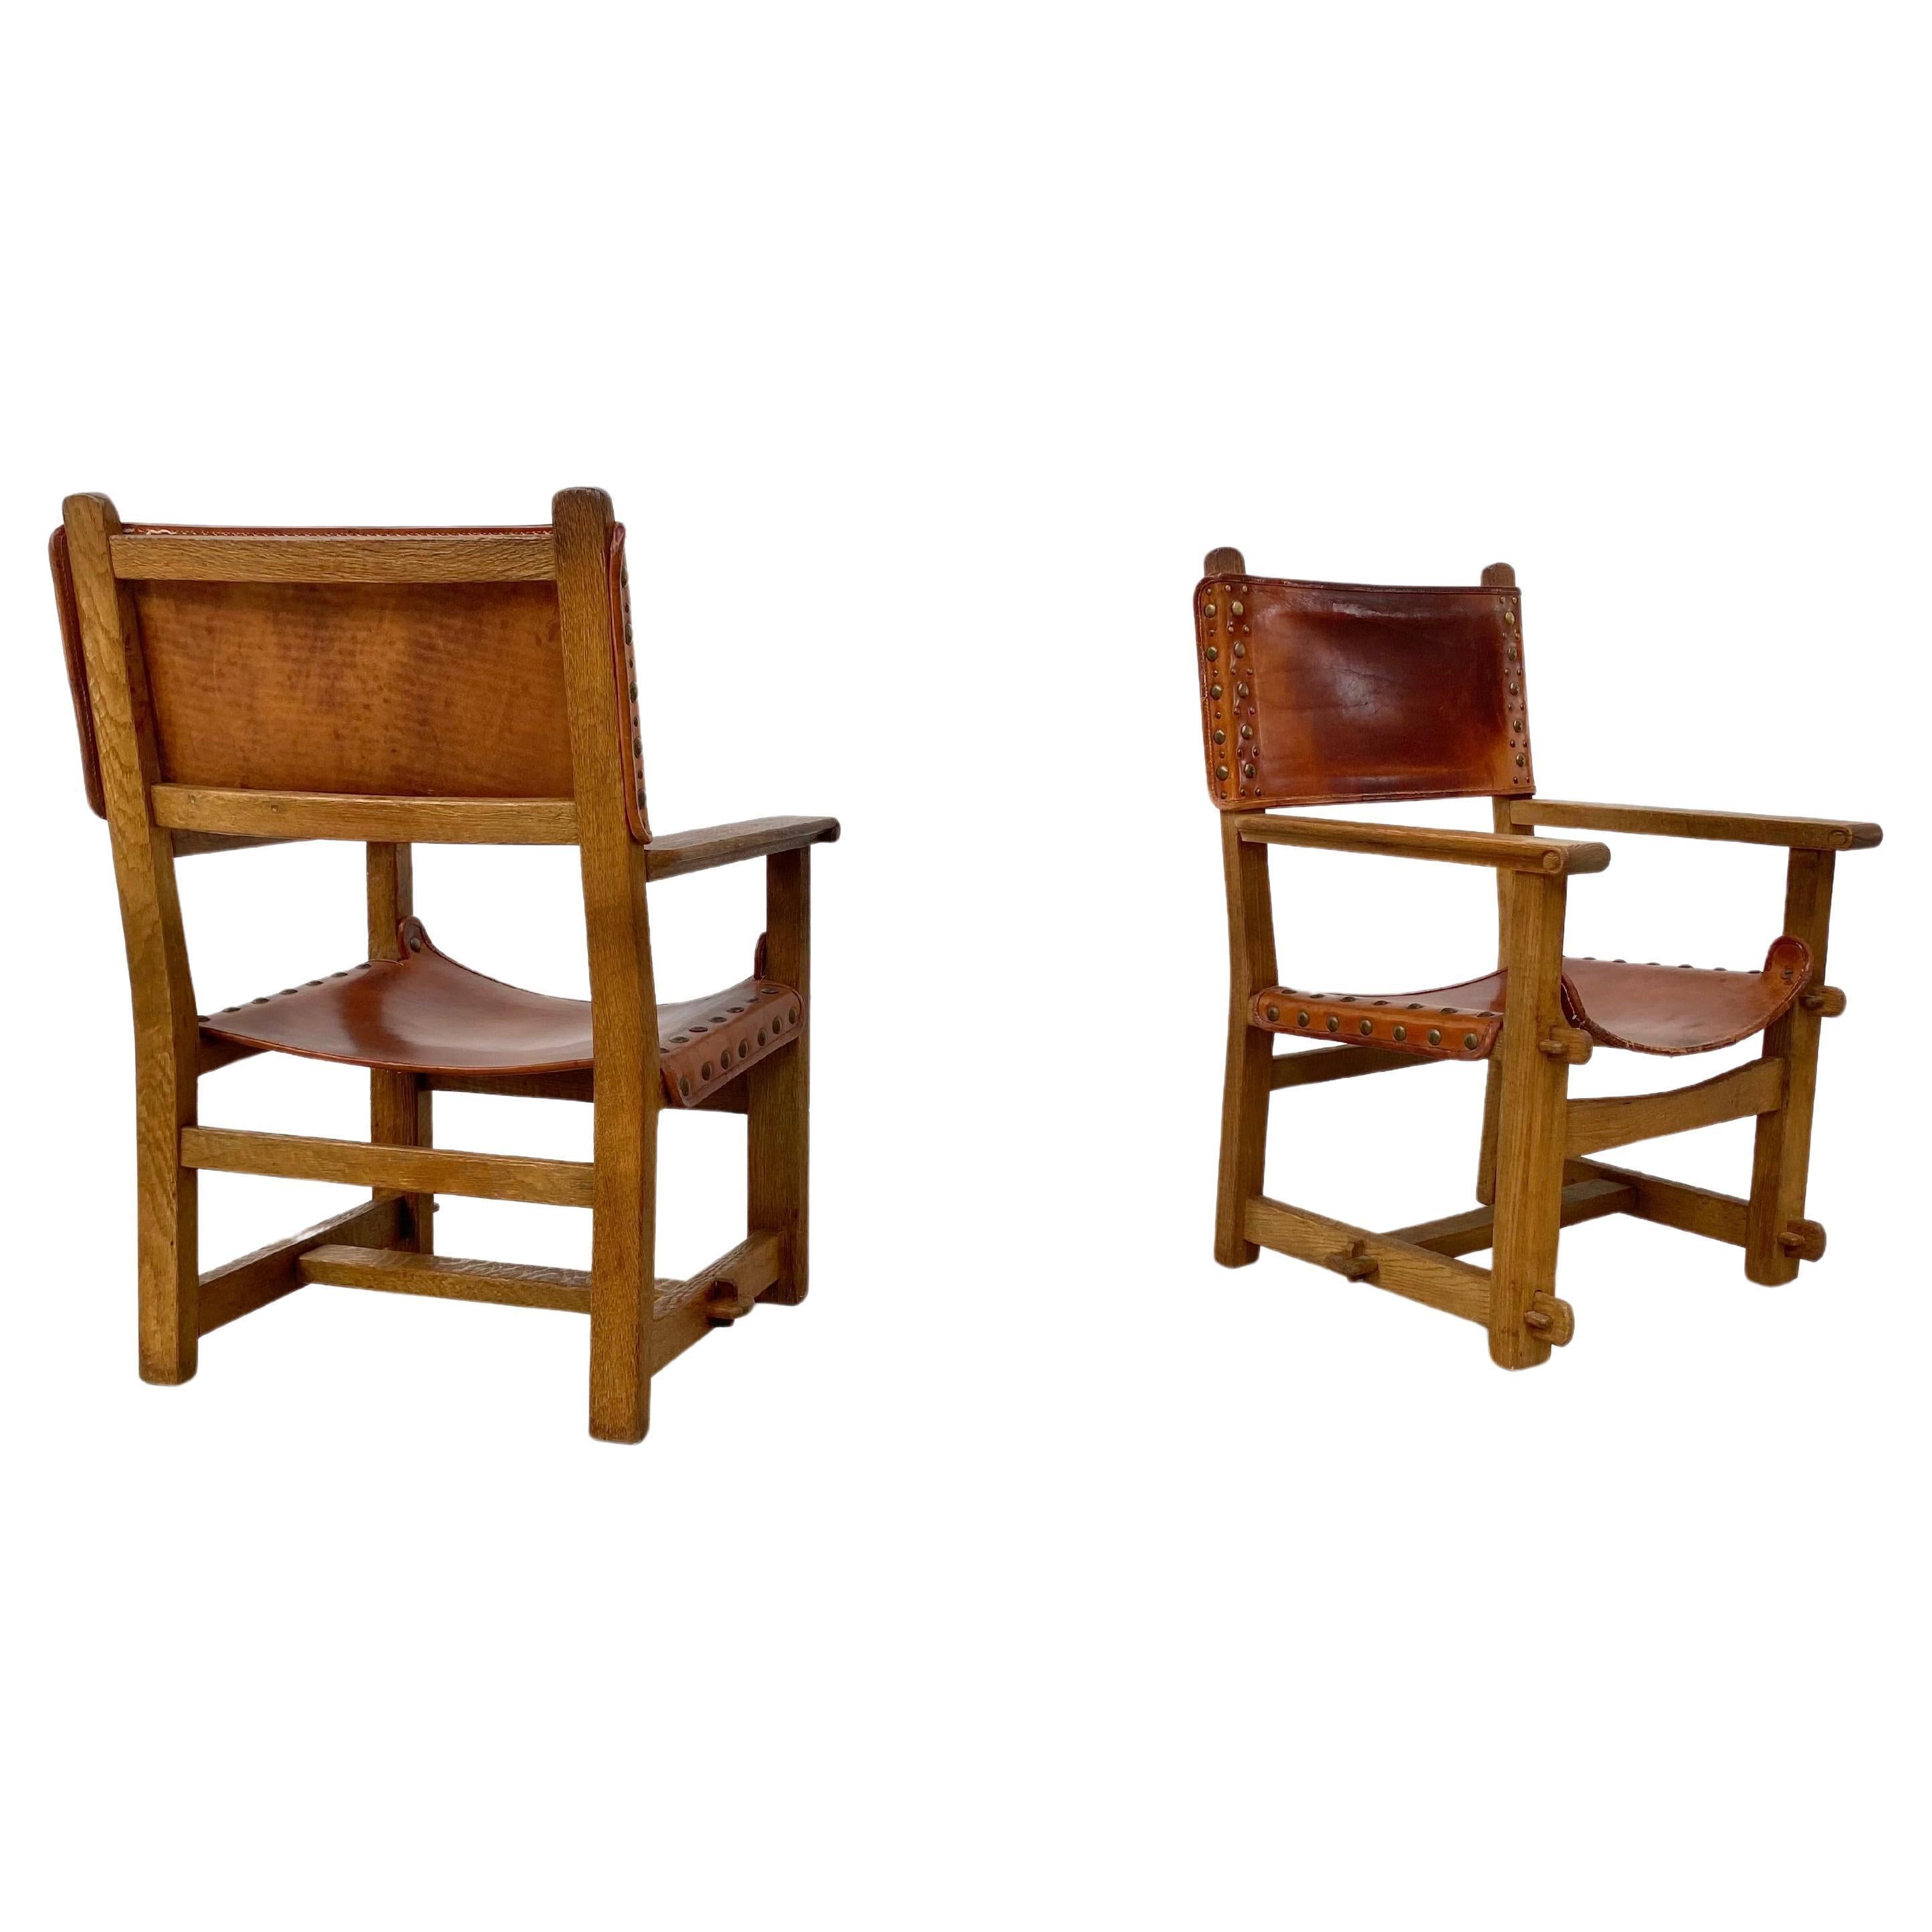 20th Century Antique French Handmade Brutalist Oak & Cognac Leather Castle Chairs, 1920s. For Sale